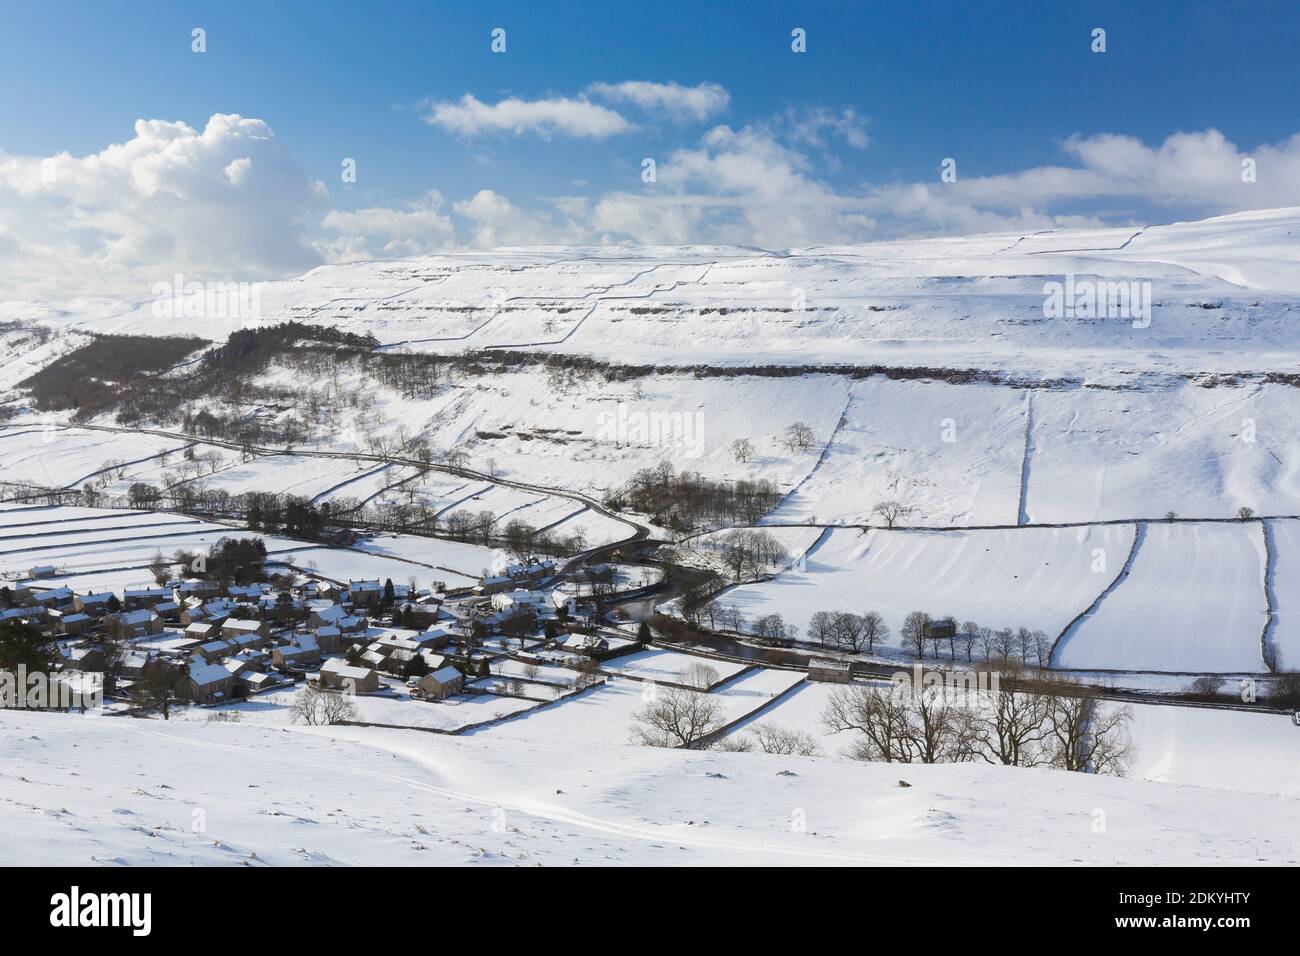 Deep snow at The village of Kettlewell in Upper Wharfedale, The Yorkshire Dales, United Kingdom. Stock Photo